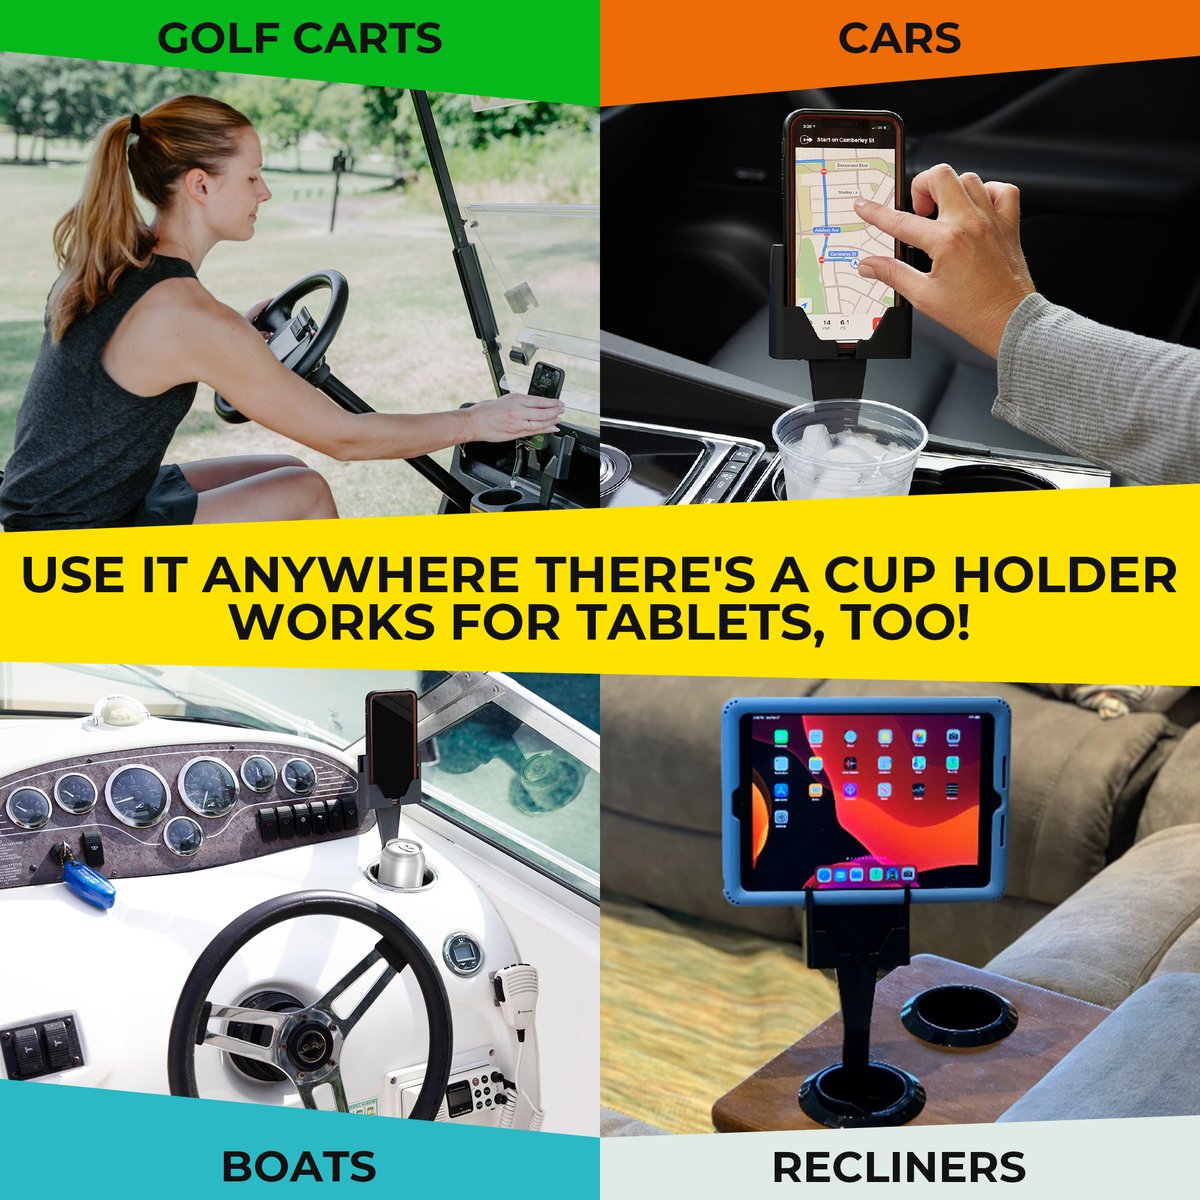 Take it anywhere – our cell phone seat is perfect for every spot! . . . #safetyfirst #eyesontheroad  #drivesafe #driveresponsibly #NoTextingWhileDriving #StaySafe #EyesOnTheRoad  #DontTextAndDrive #RoadSafety #FocusOnTheRoad #CellPhoneSeat #carphoneholder #PhoneSafety